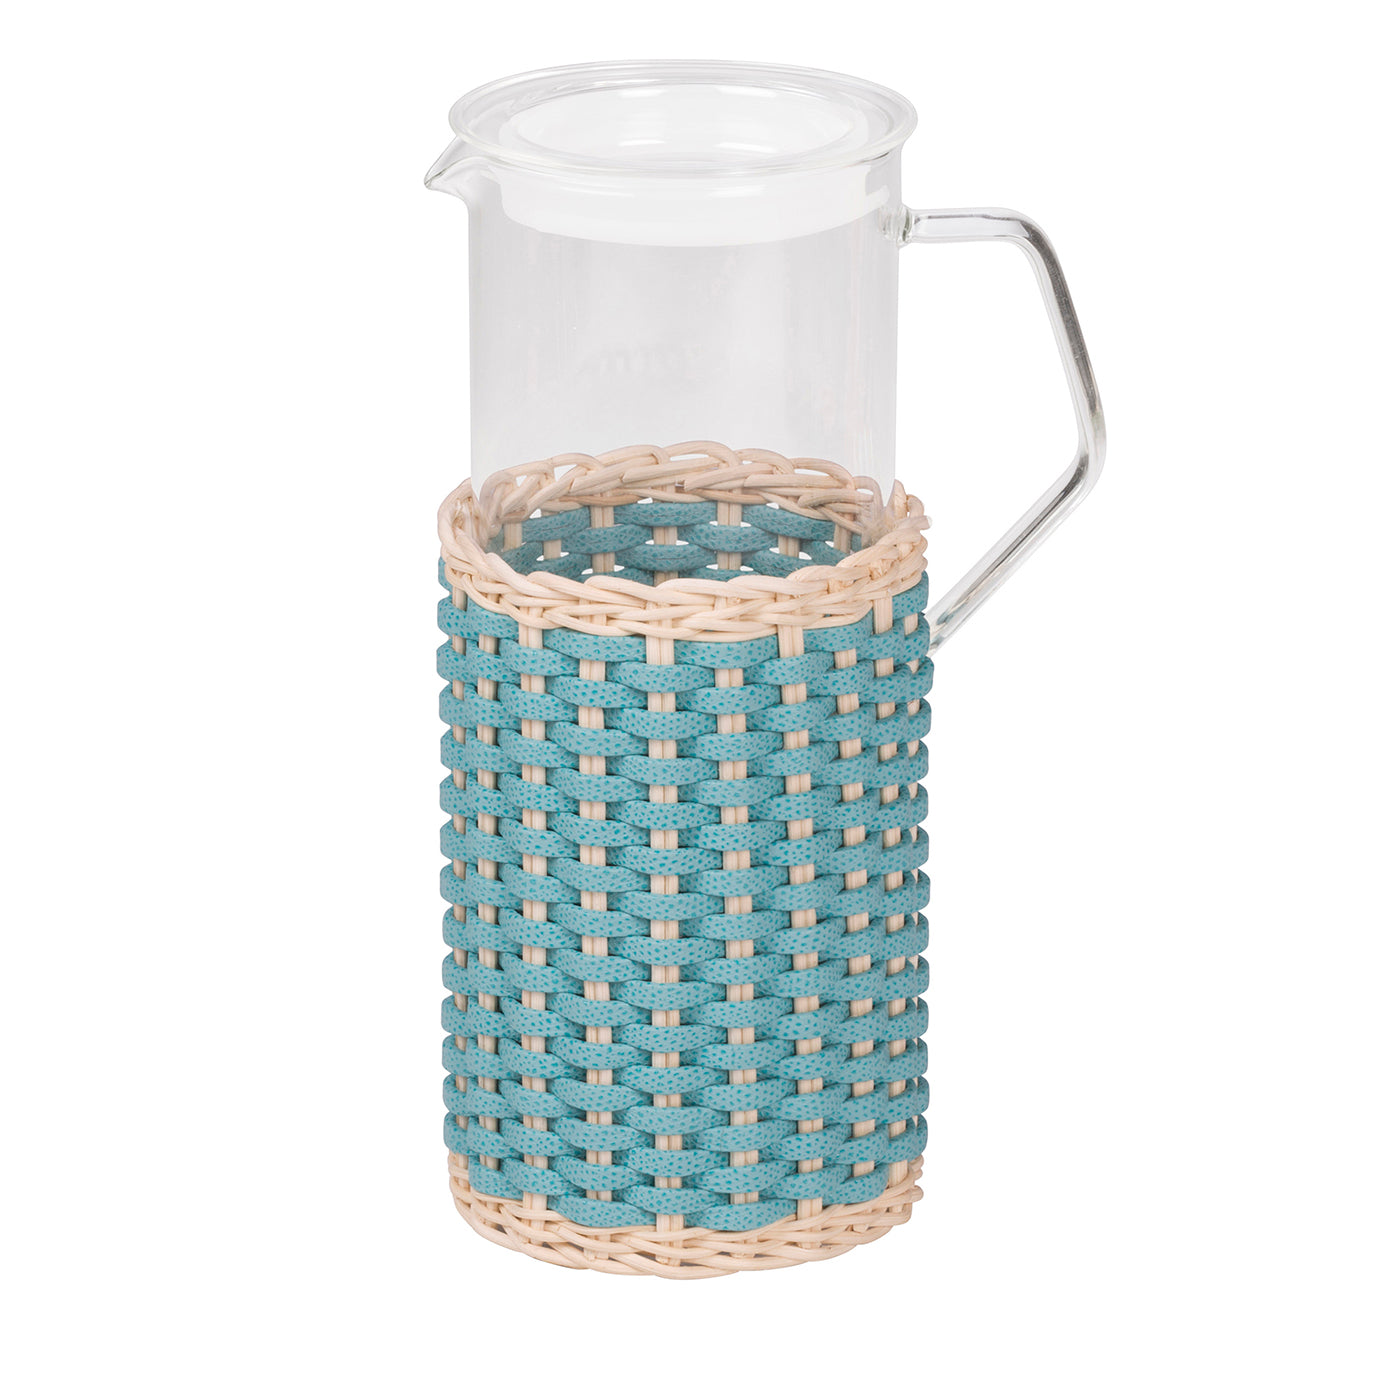 Marseille Leather & Rattan Glass Pitcher - Light Blue - Main view